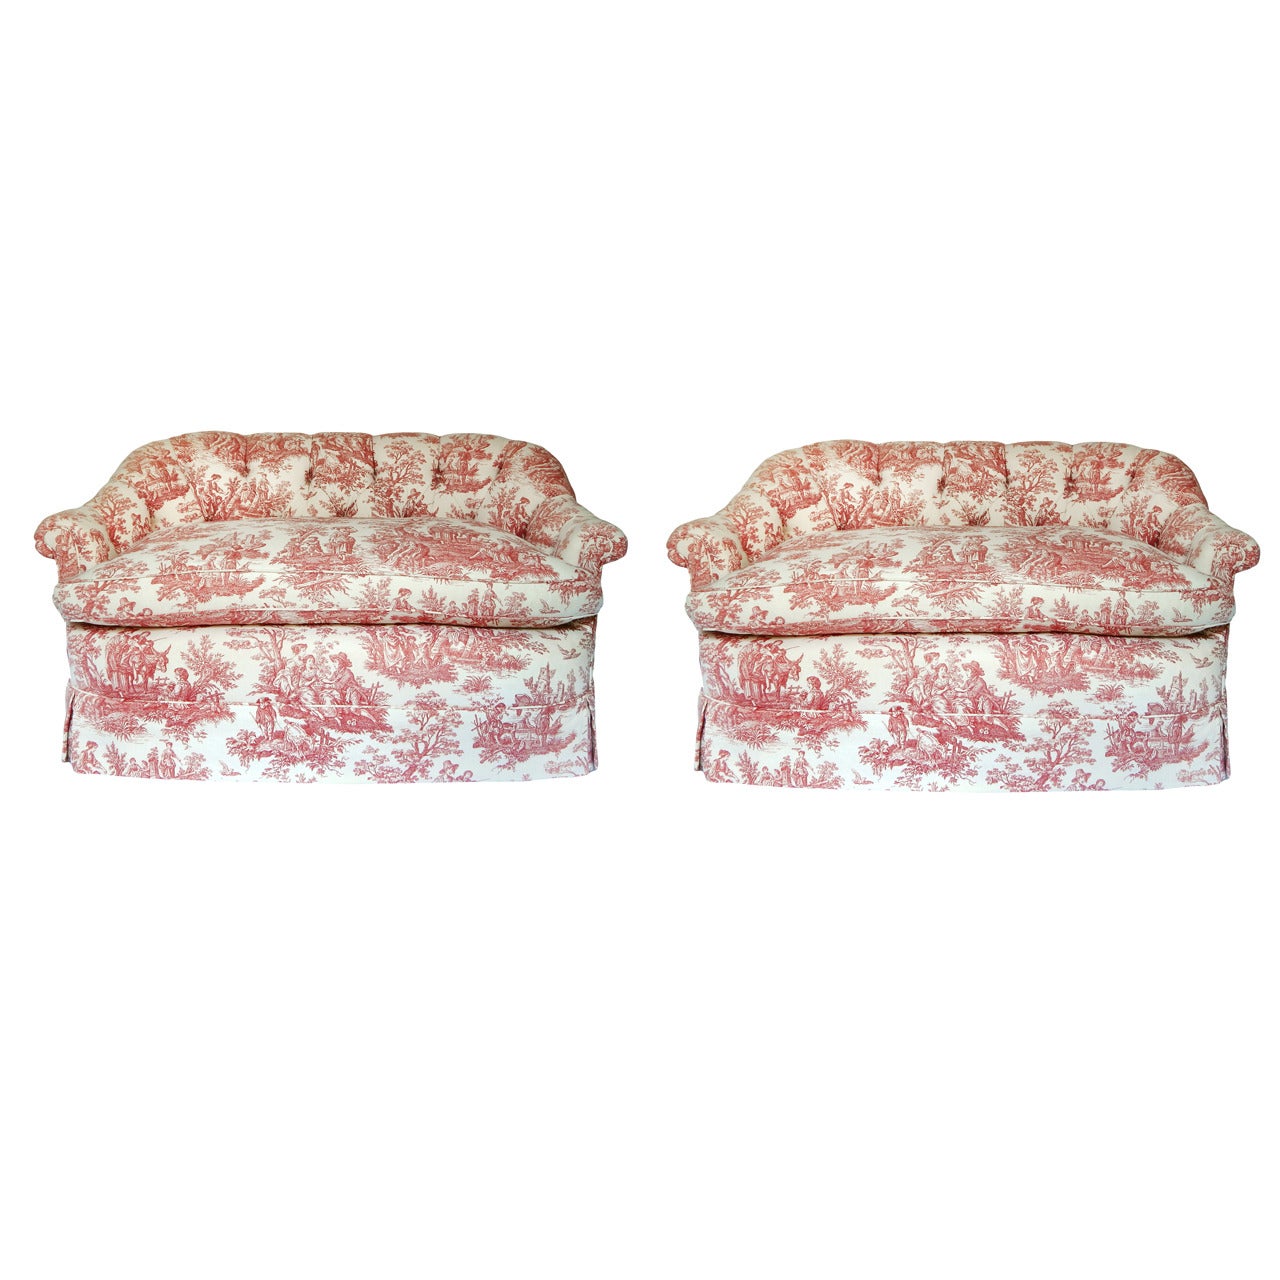 Pair of Tufted Toile Loveseats